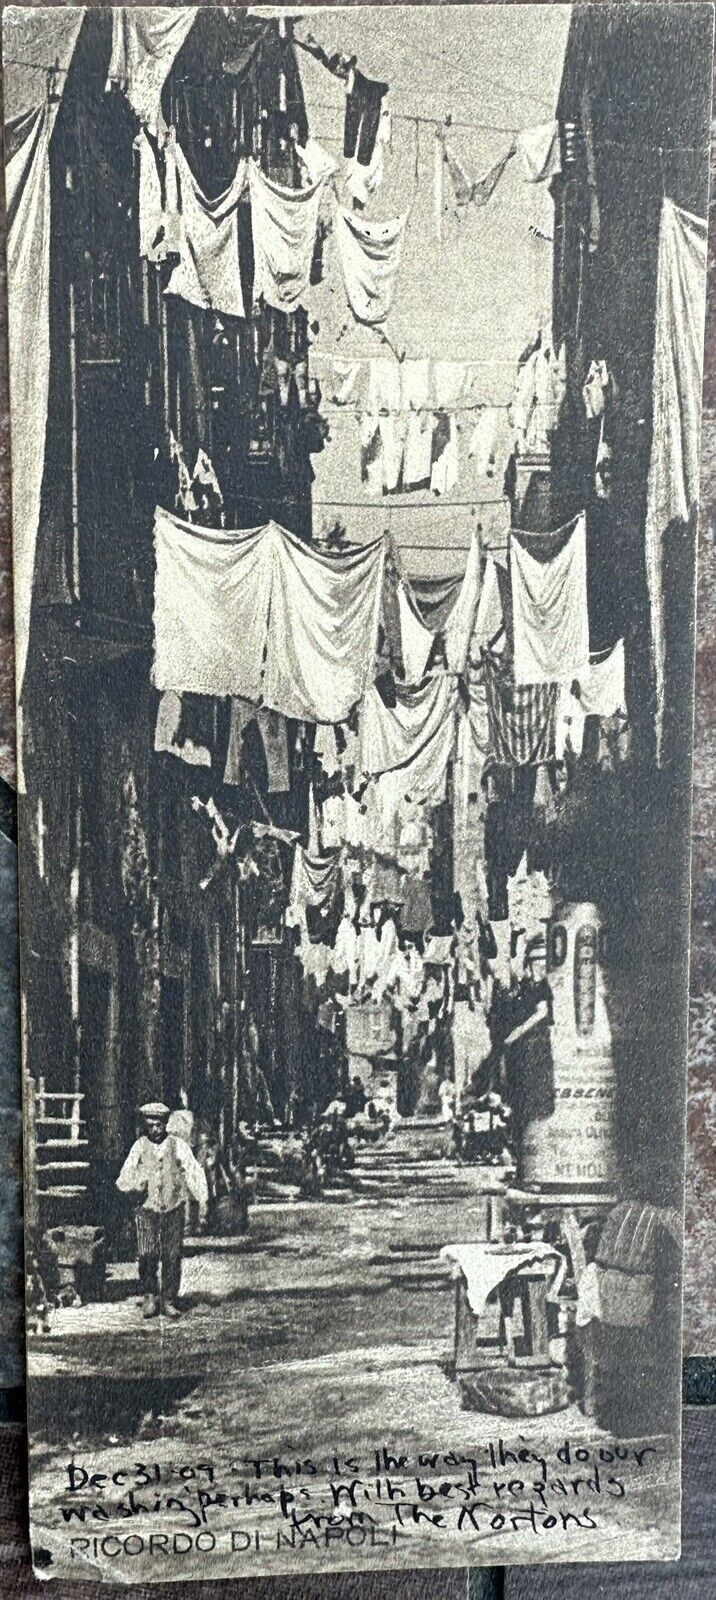 Naples, ITALY - Laundry In The City - Small Postcard - Street View, World Card